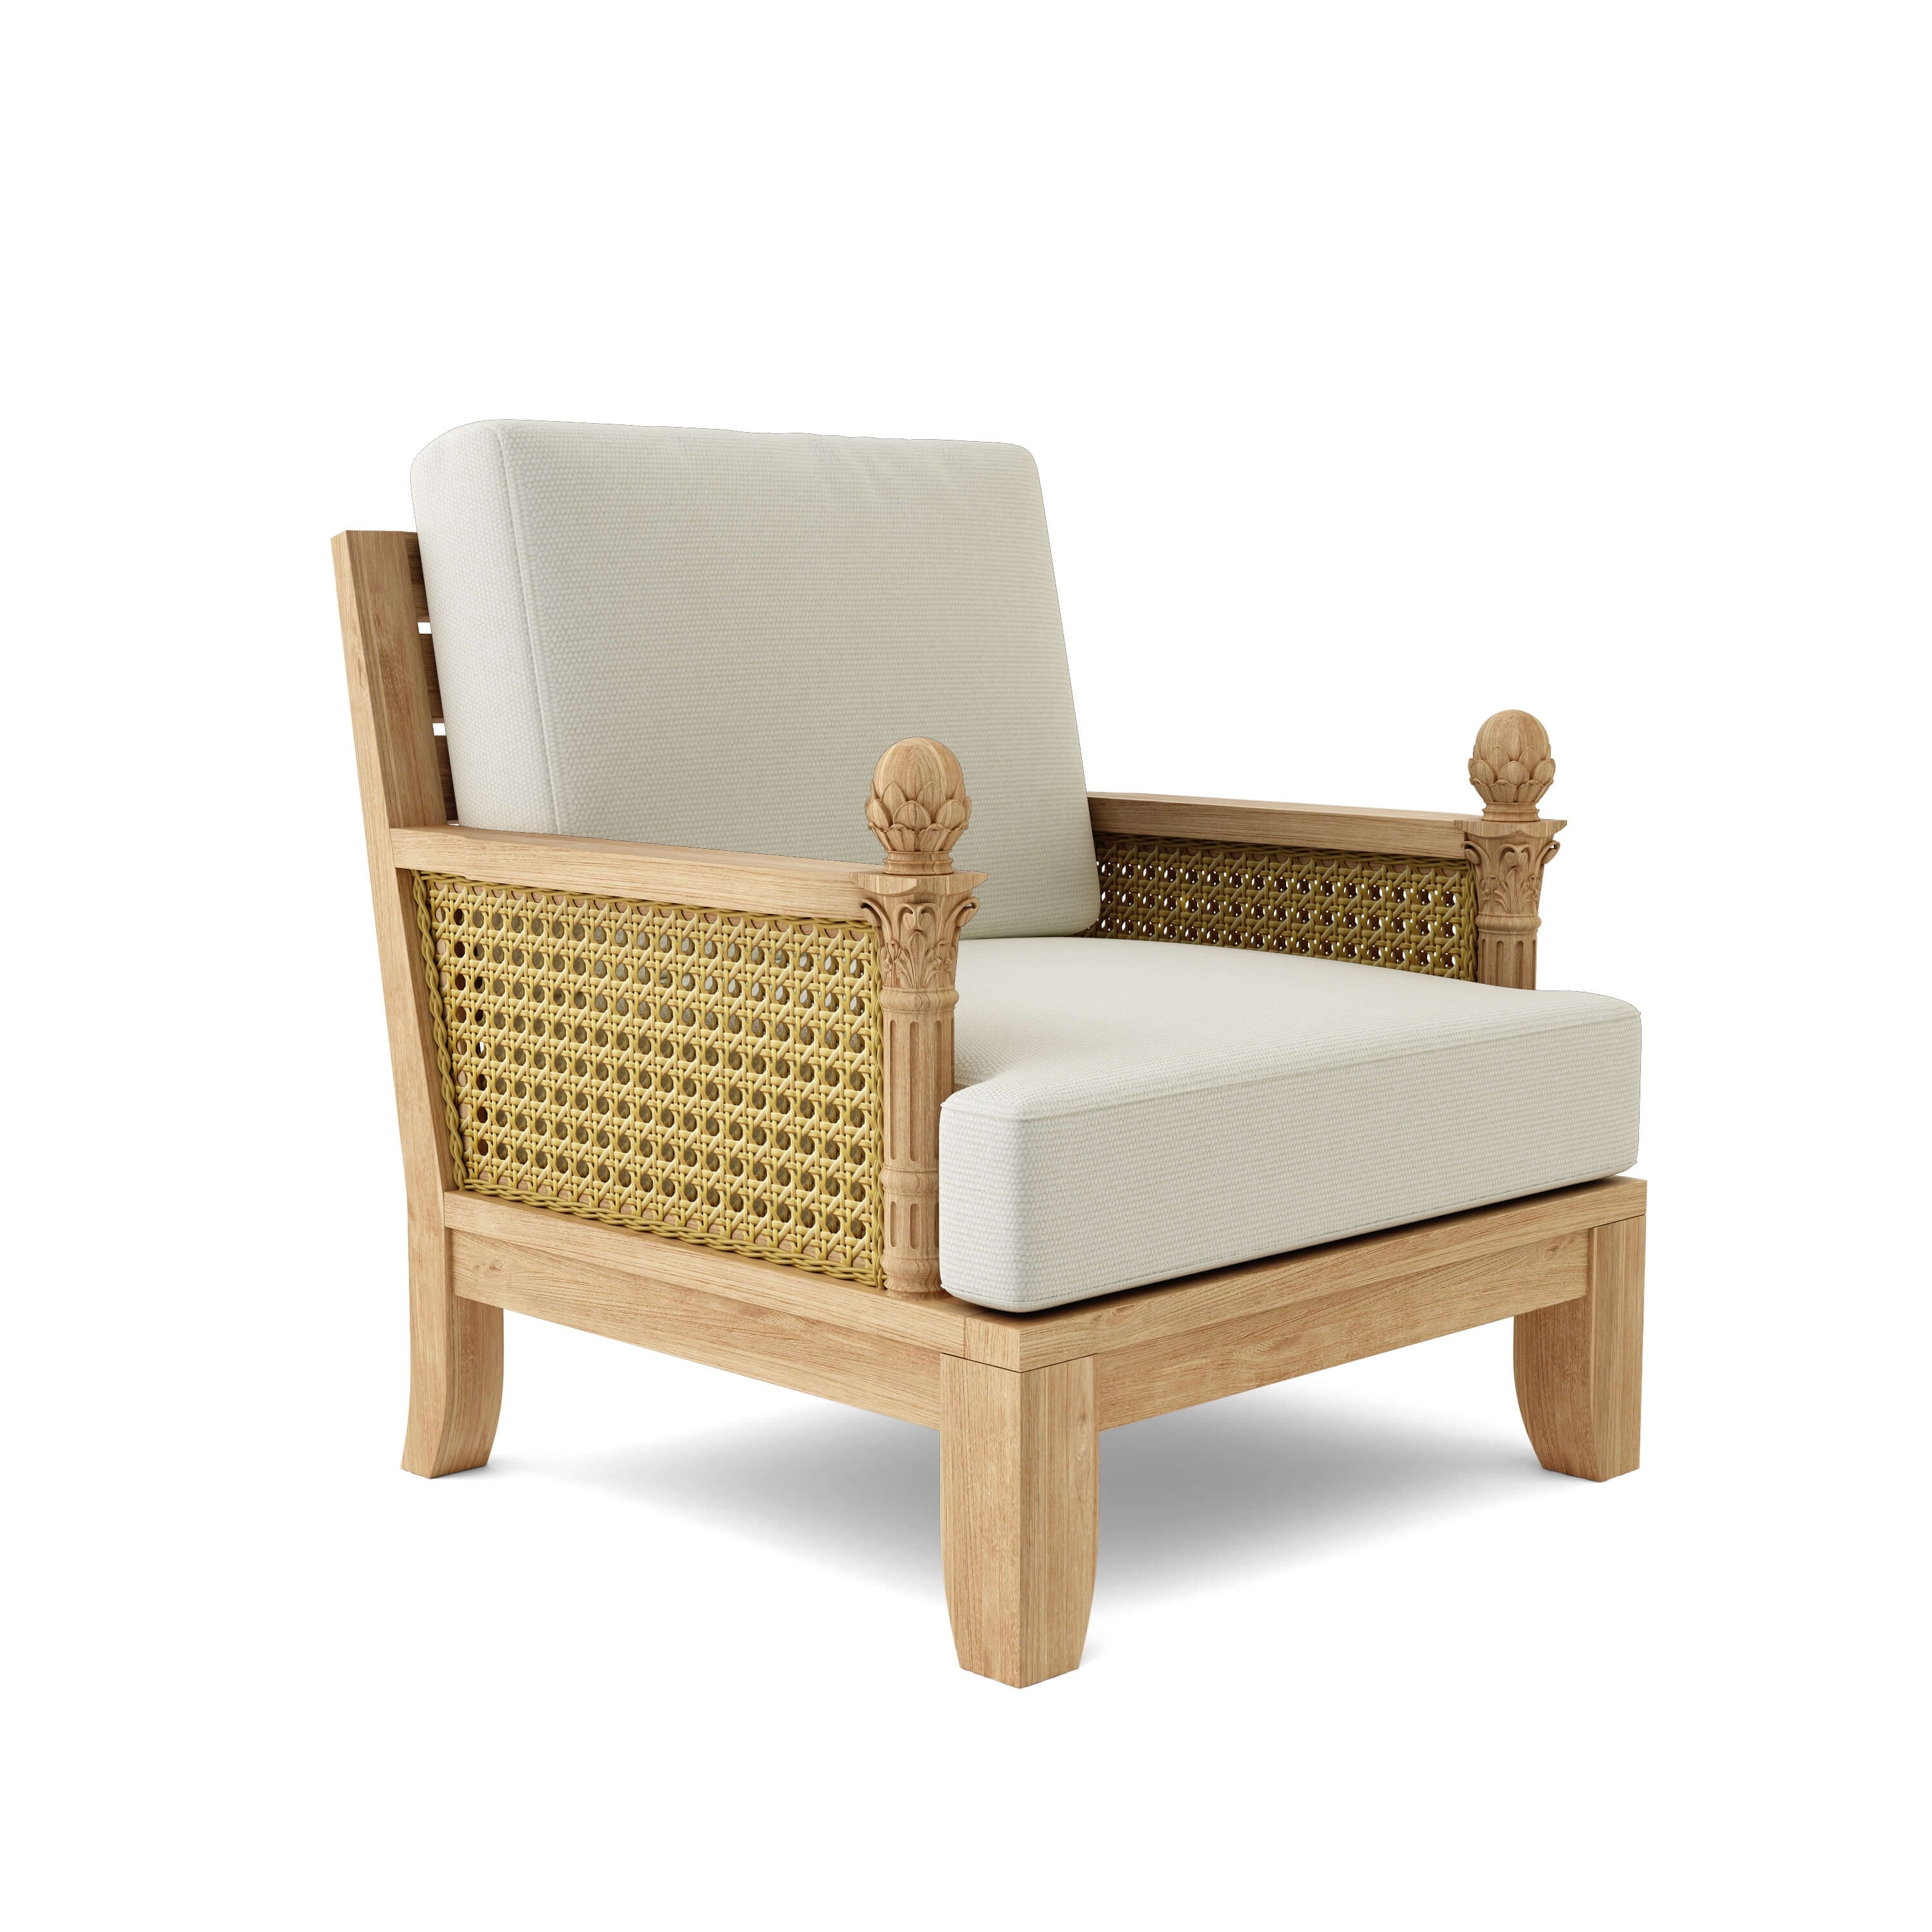 Luxe Handcrafted Teak Outdoor Lounge Chair With Sunbrella Cushions